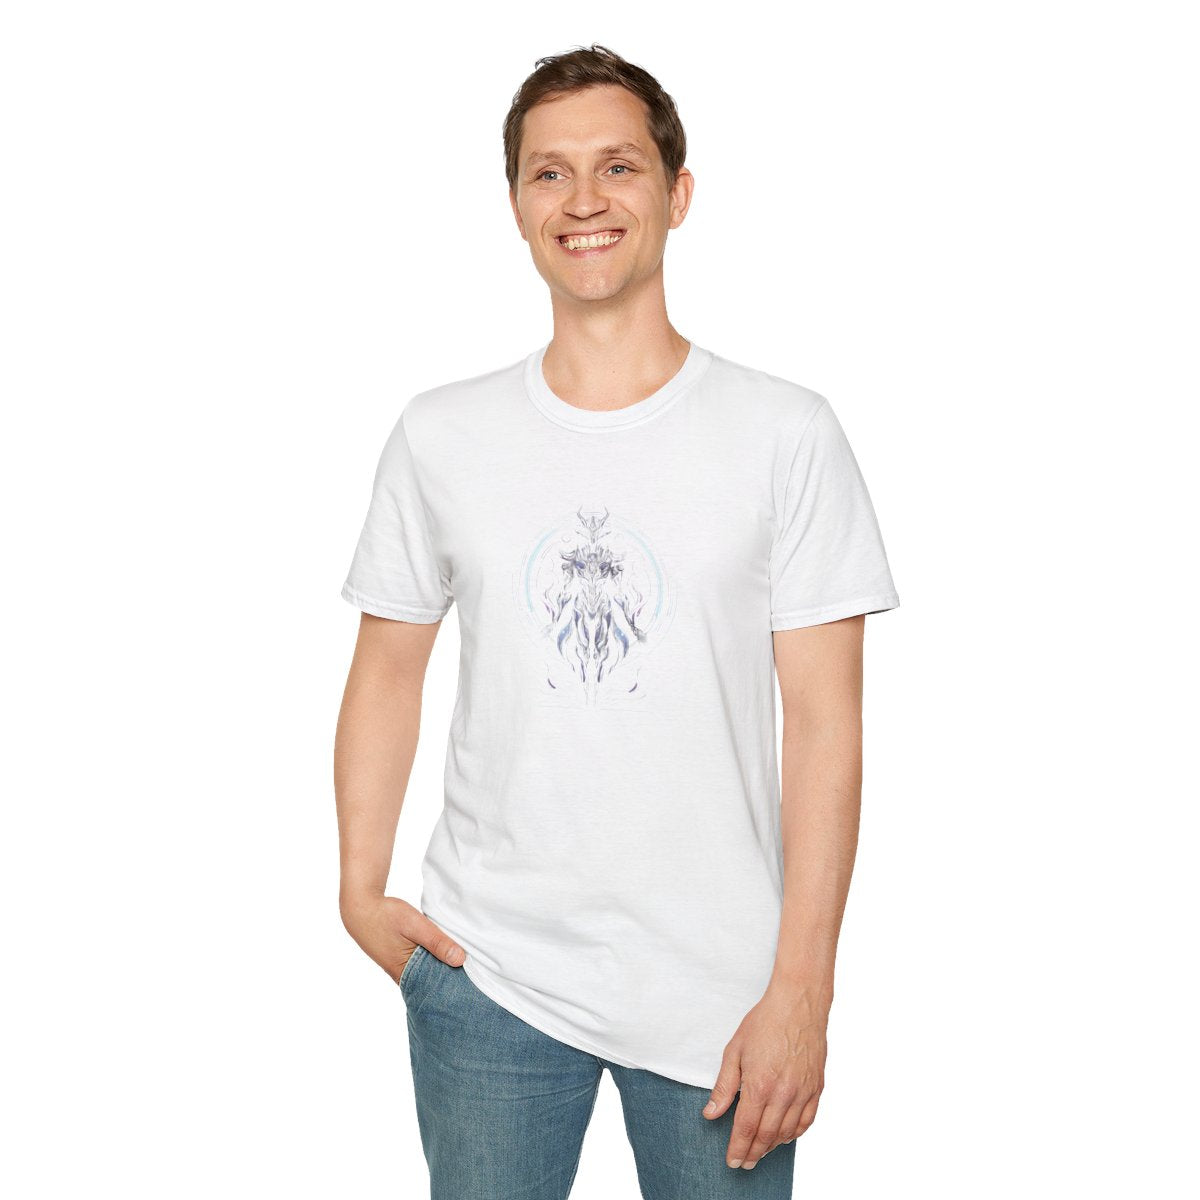 Unique T-Shirt - Mystical Robot Flying through the air - Fantasy Style T-Shirt